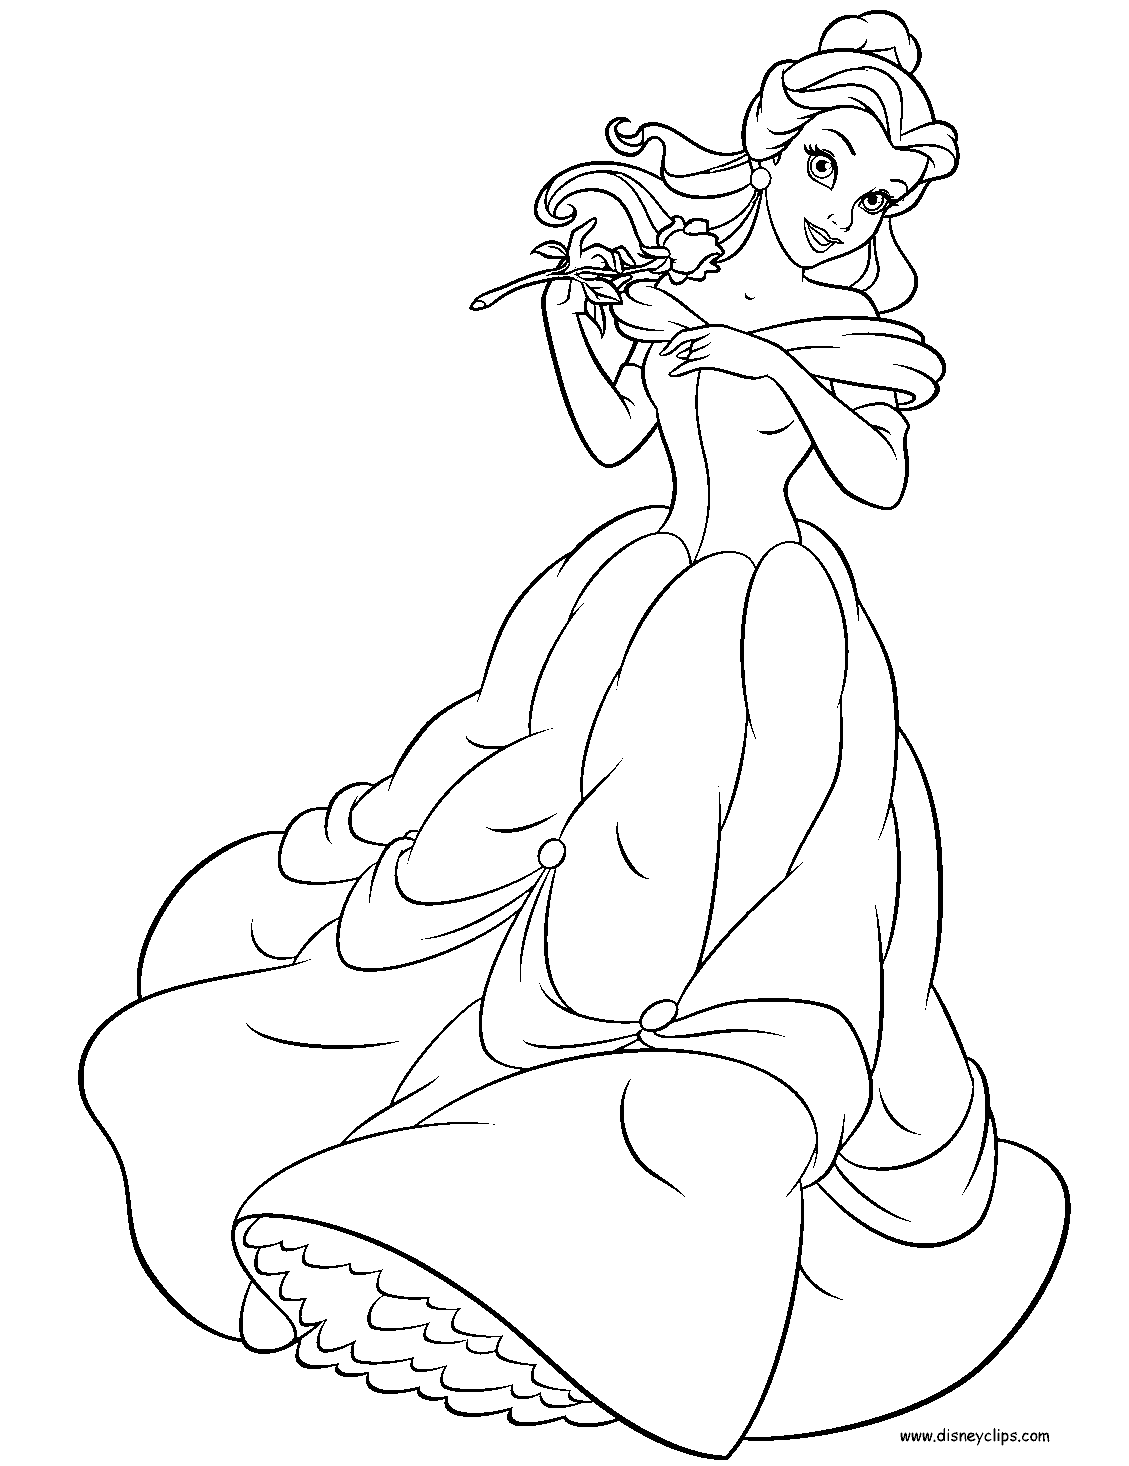 Princess Belle with Rose Coloring Page